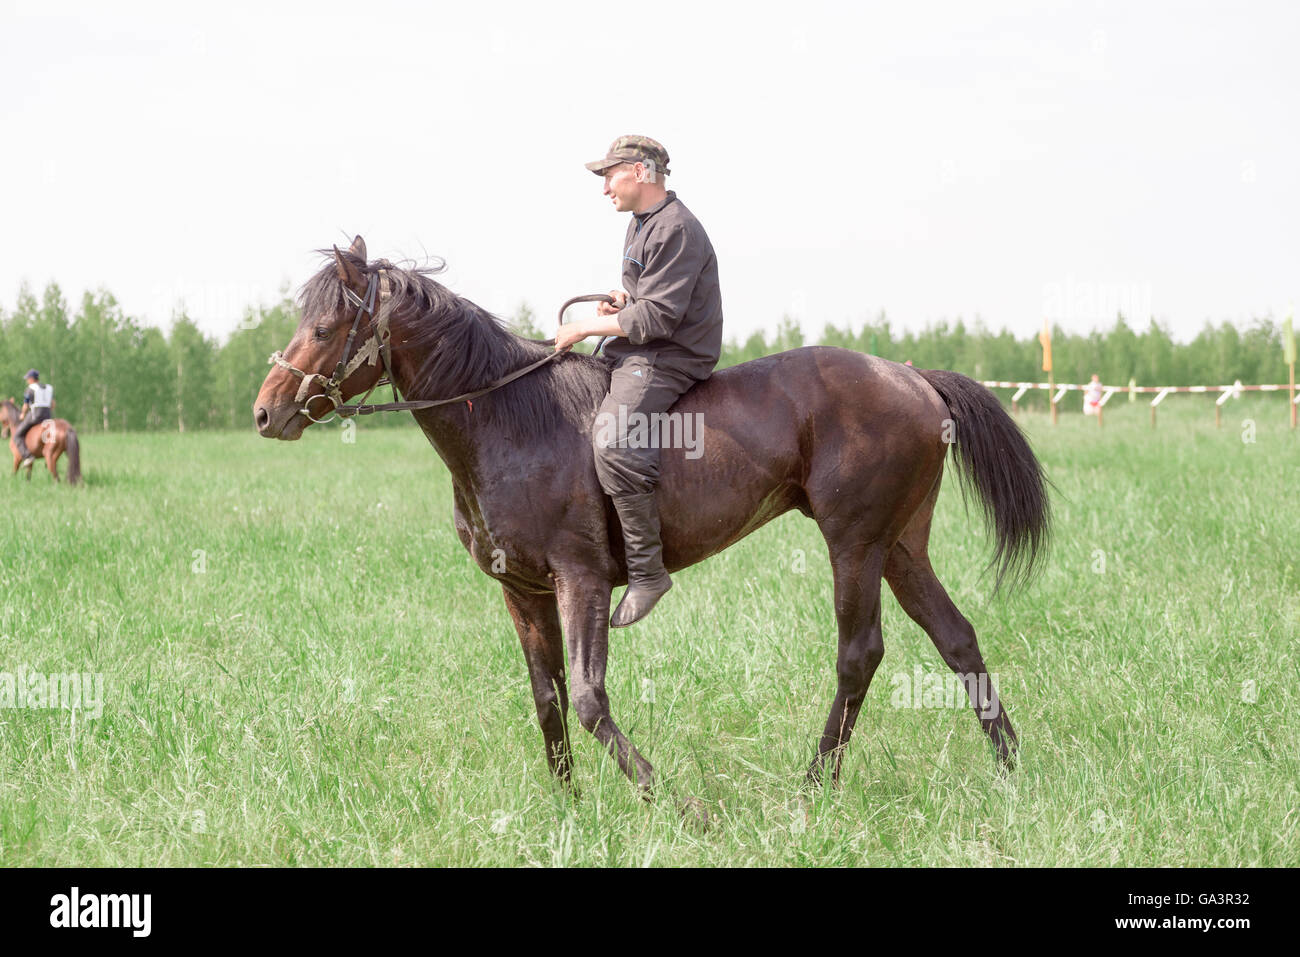 Man riding a brown horse outside without a saddle or safety hat Stock Photo